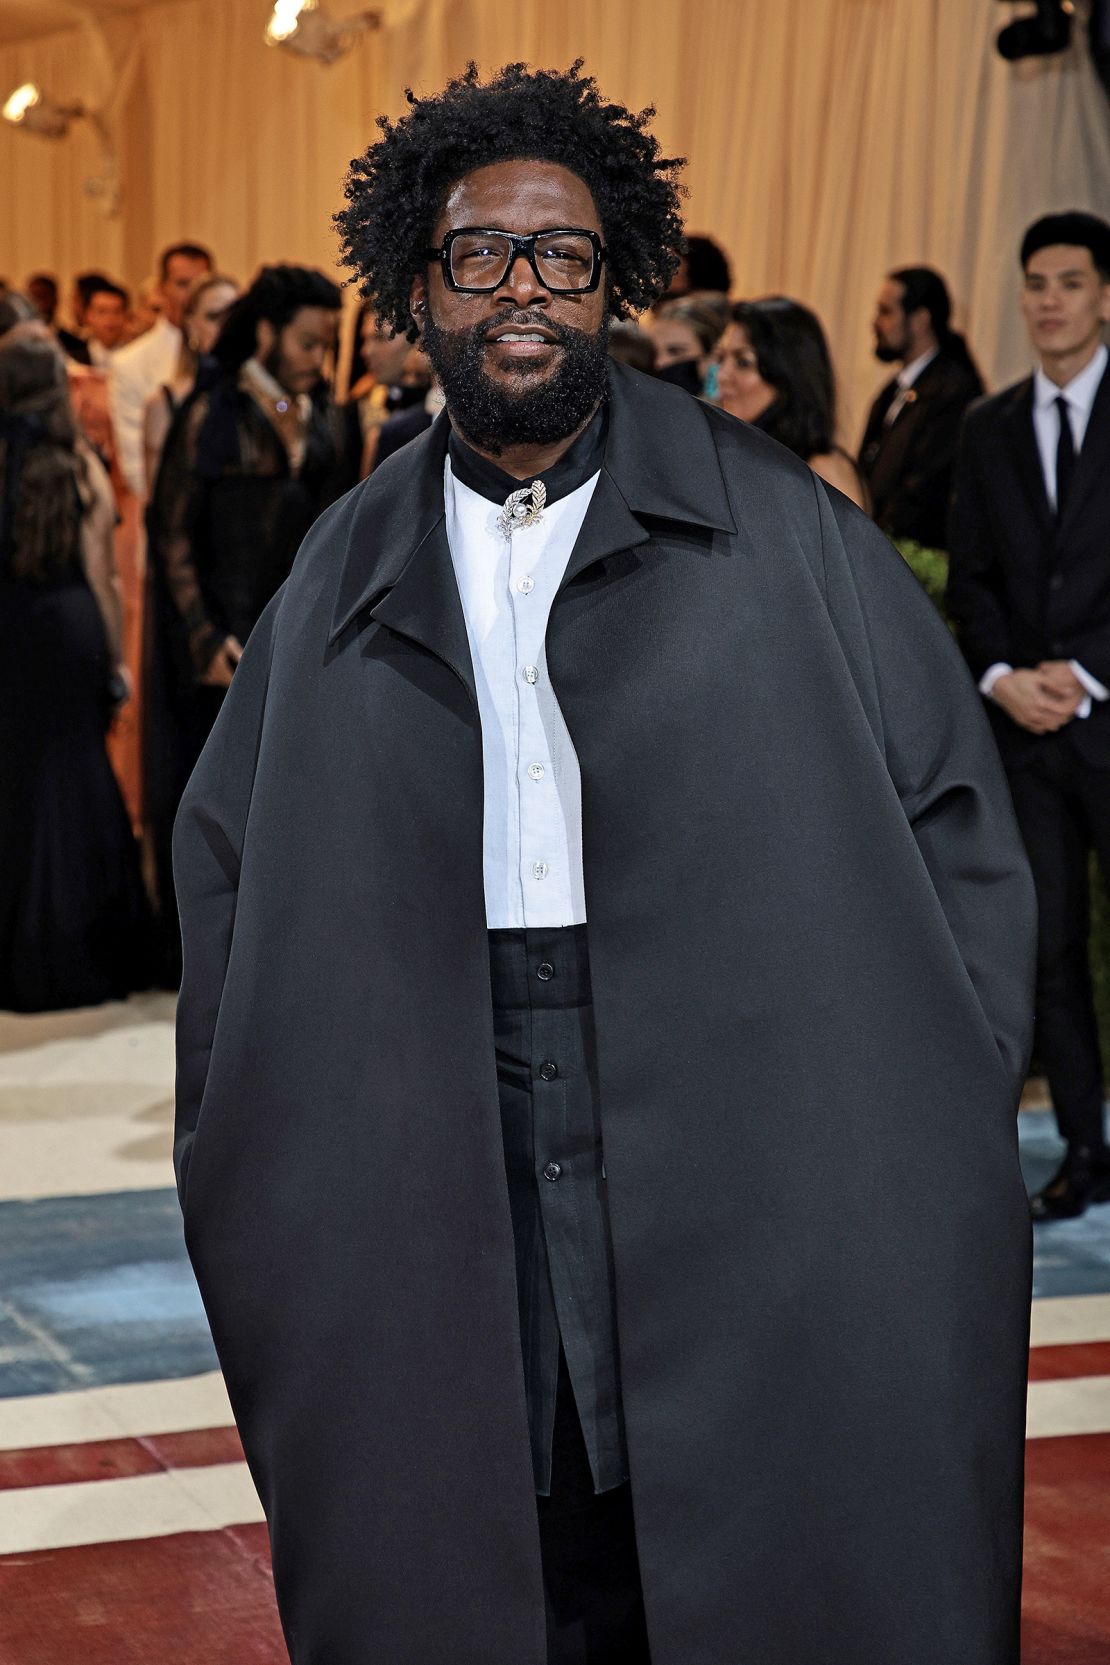 Questlove's coat was designed with the help of Black women quilters from Gee's Bend, Alabama.